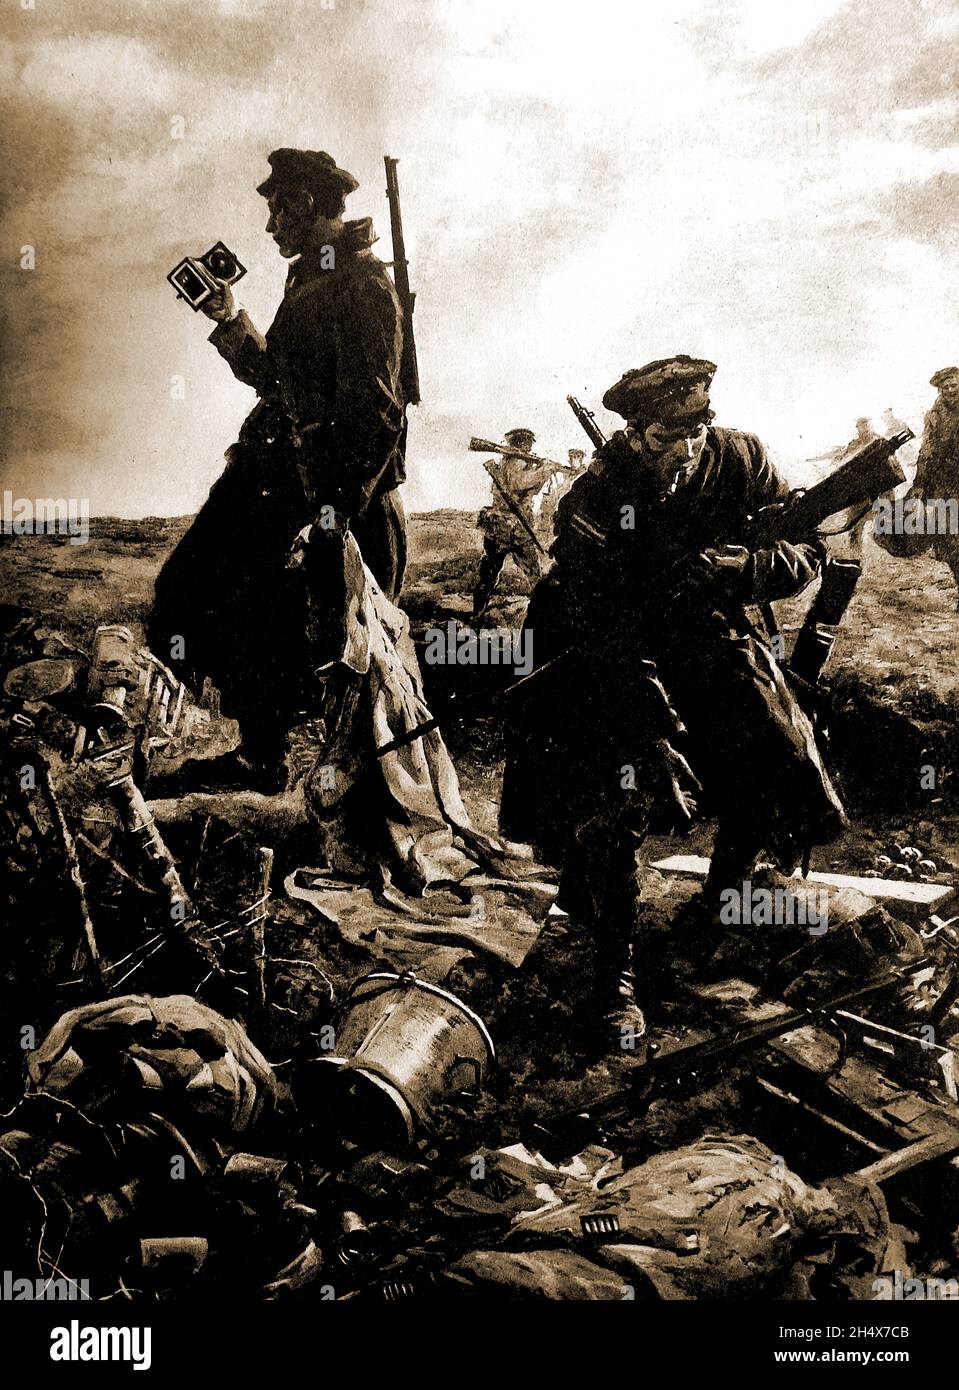 WWI - British soldiers sort through debris after a successful attack on the enemy. Stock Photo